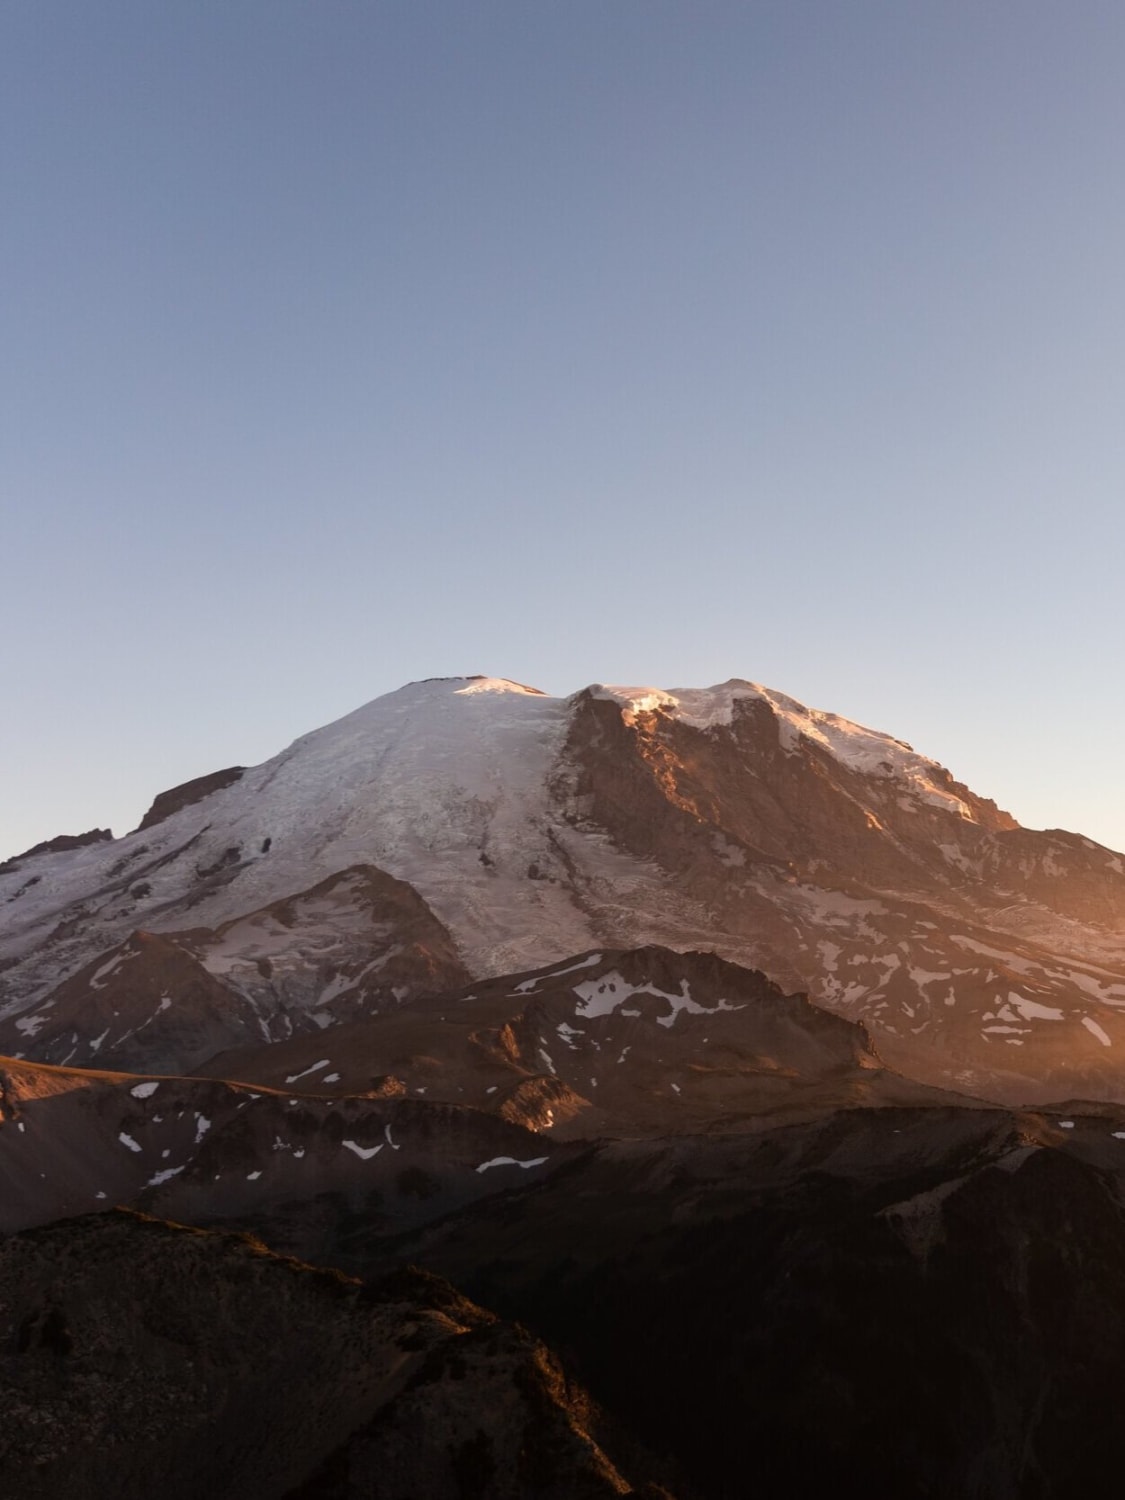 The Ultimate Guide to Mount Rainier National Park: 10 Unforgettable Things to Do